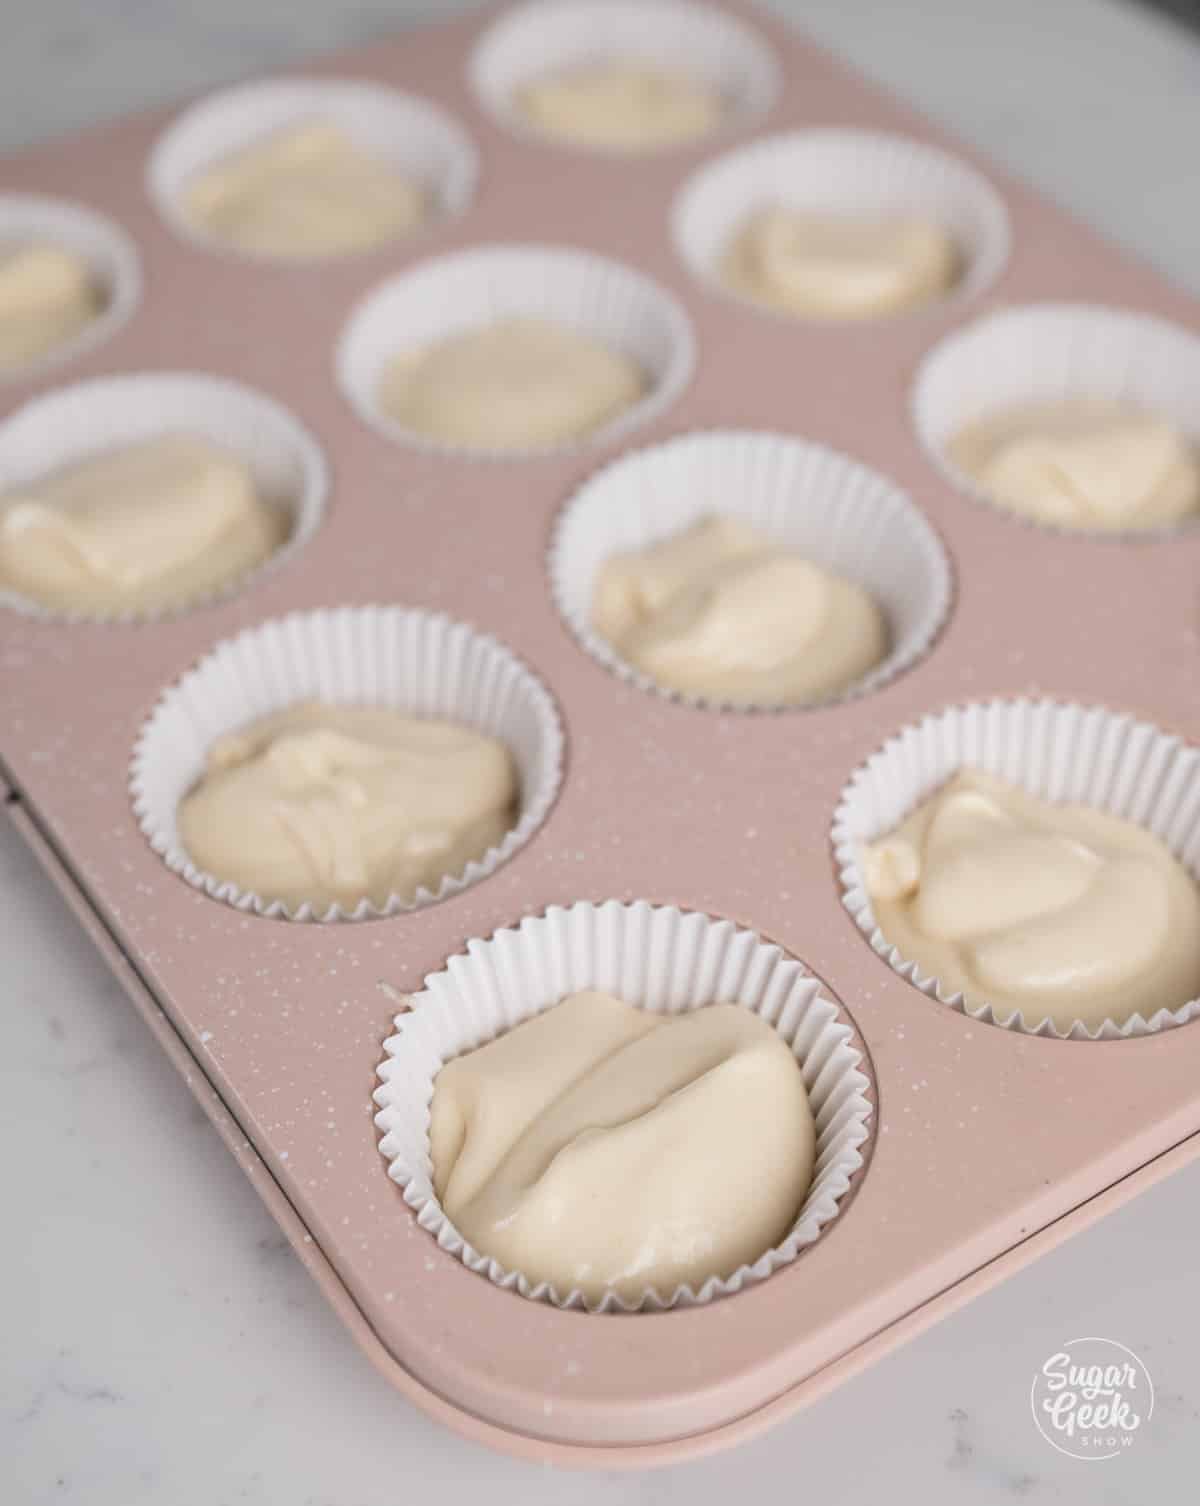 Cupcake pan with filled cupcake liners ready to bake.